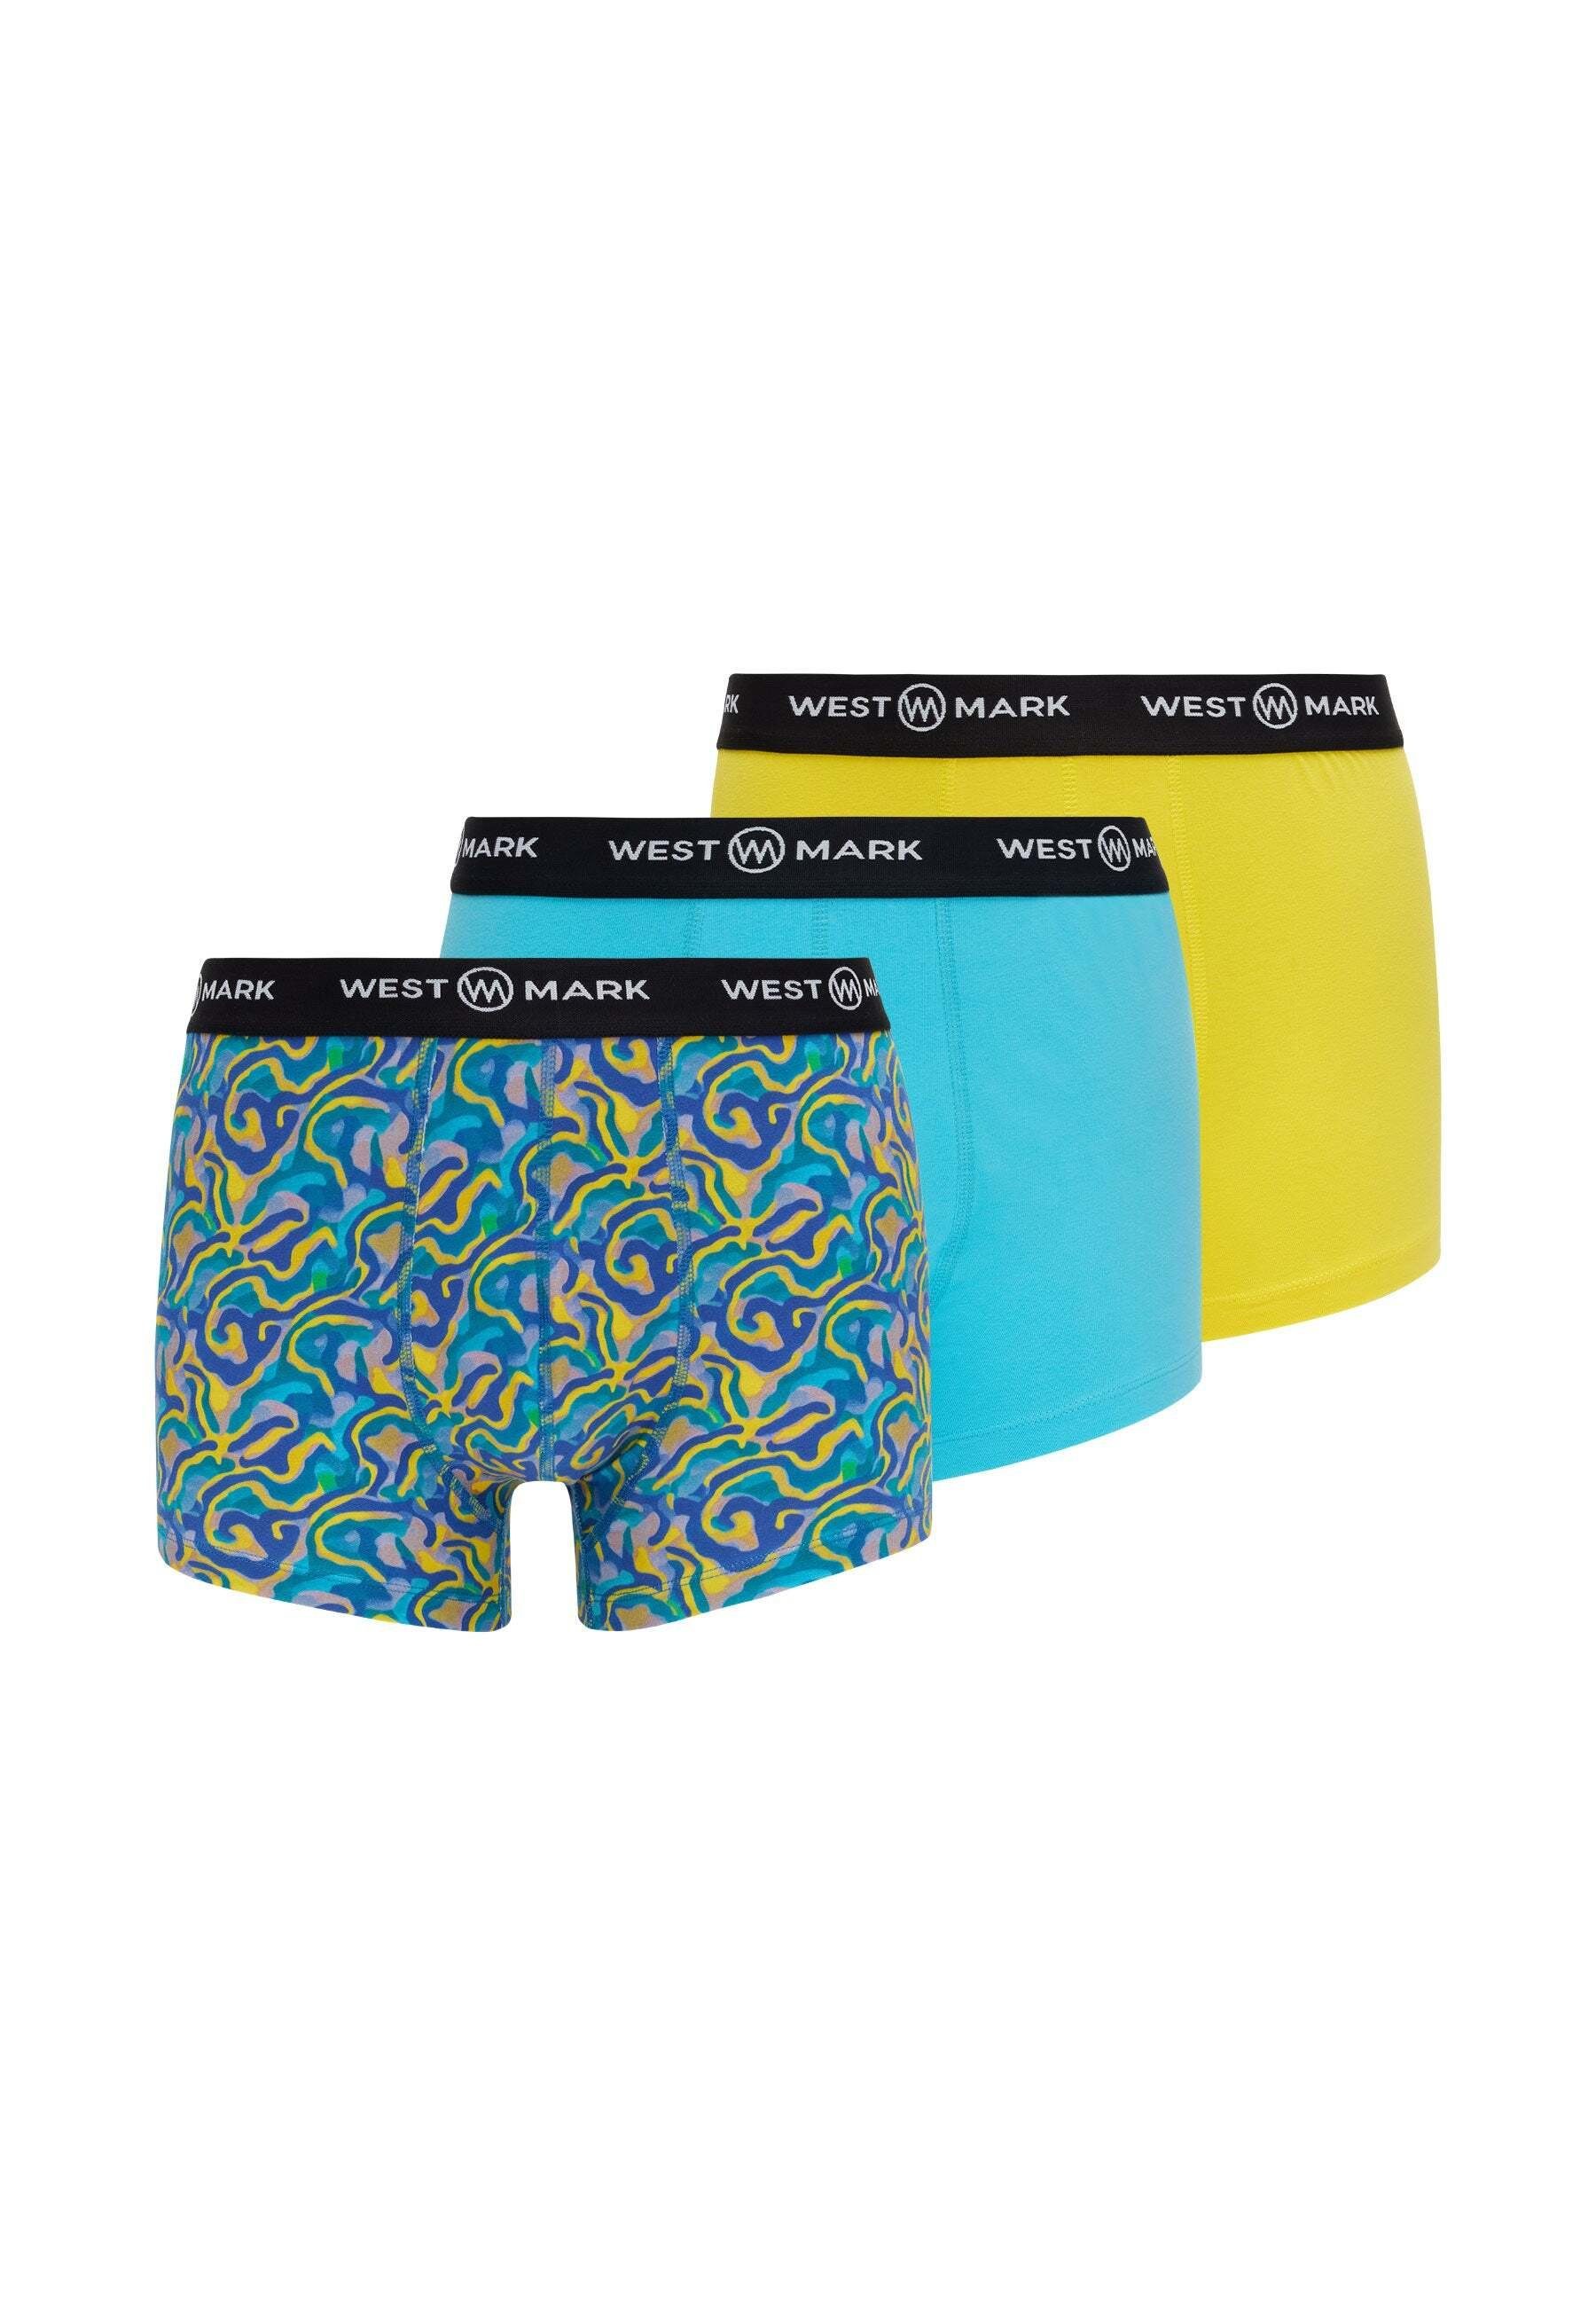 WESTMARK LONDON Boxershorts OSCAR 3-PACK WMABSTRACT (3-PACK Set, 3-St) Blue AOP, Yellow, Blue